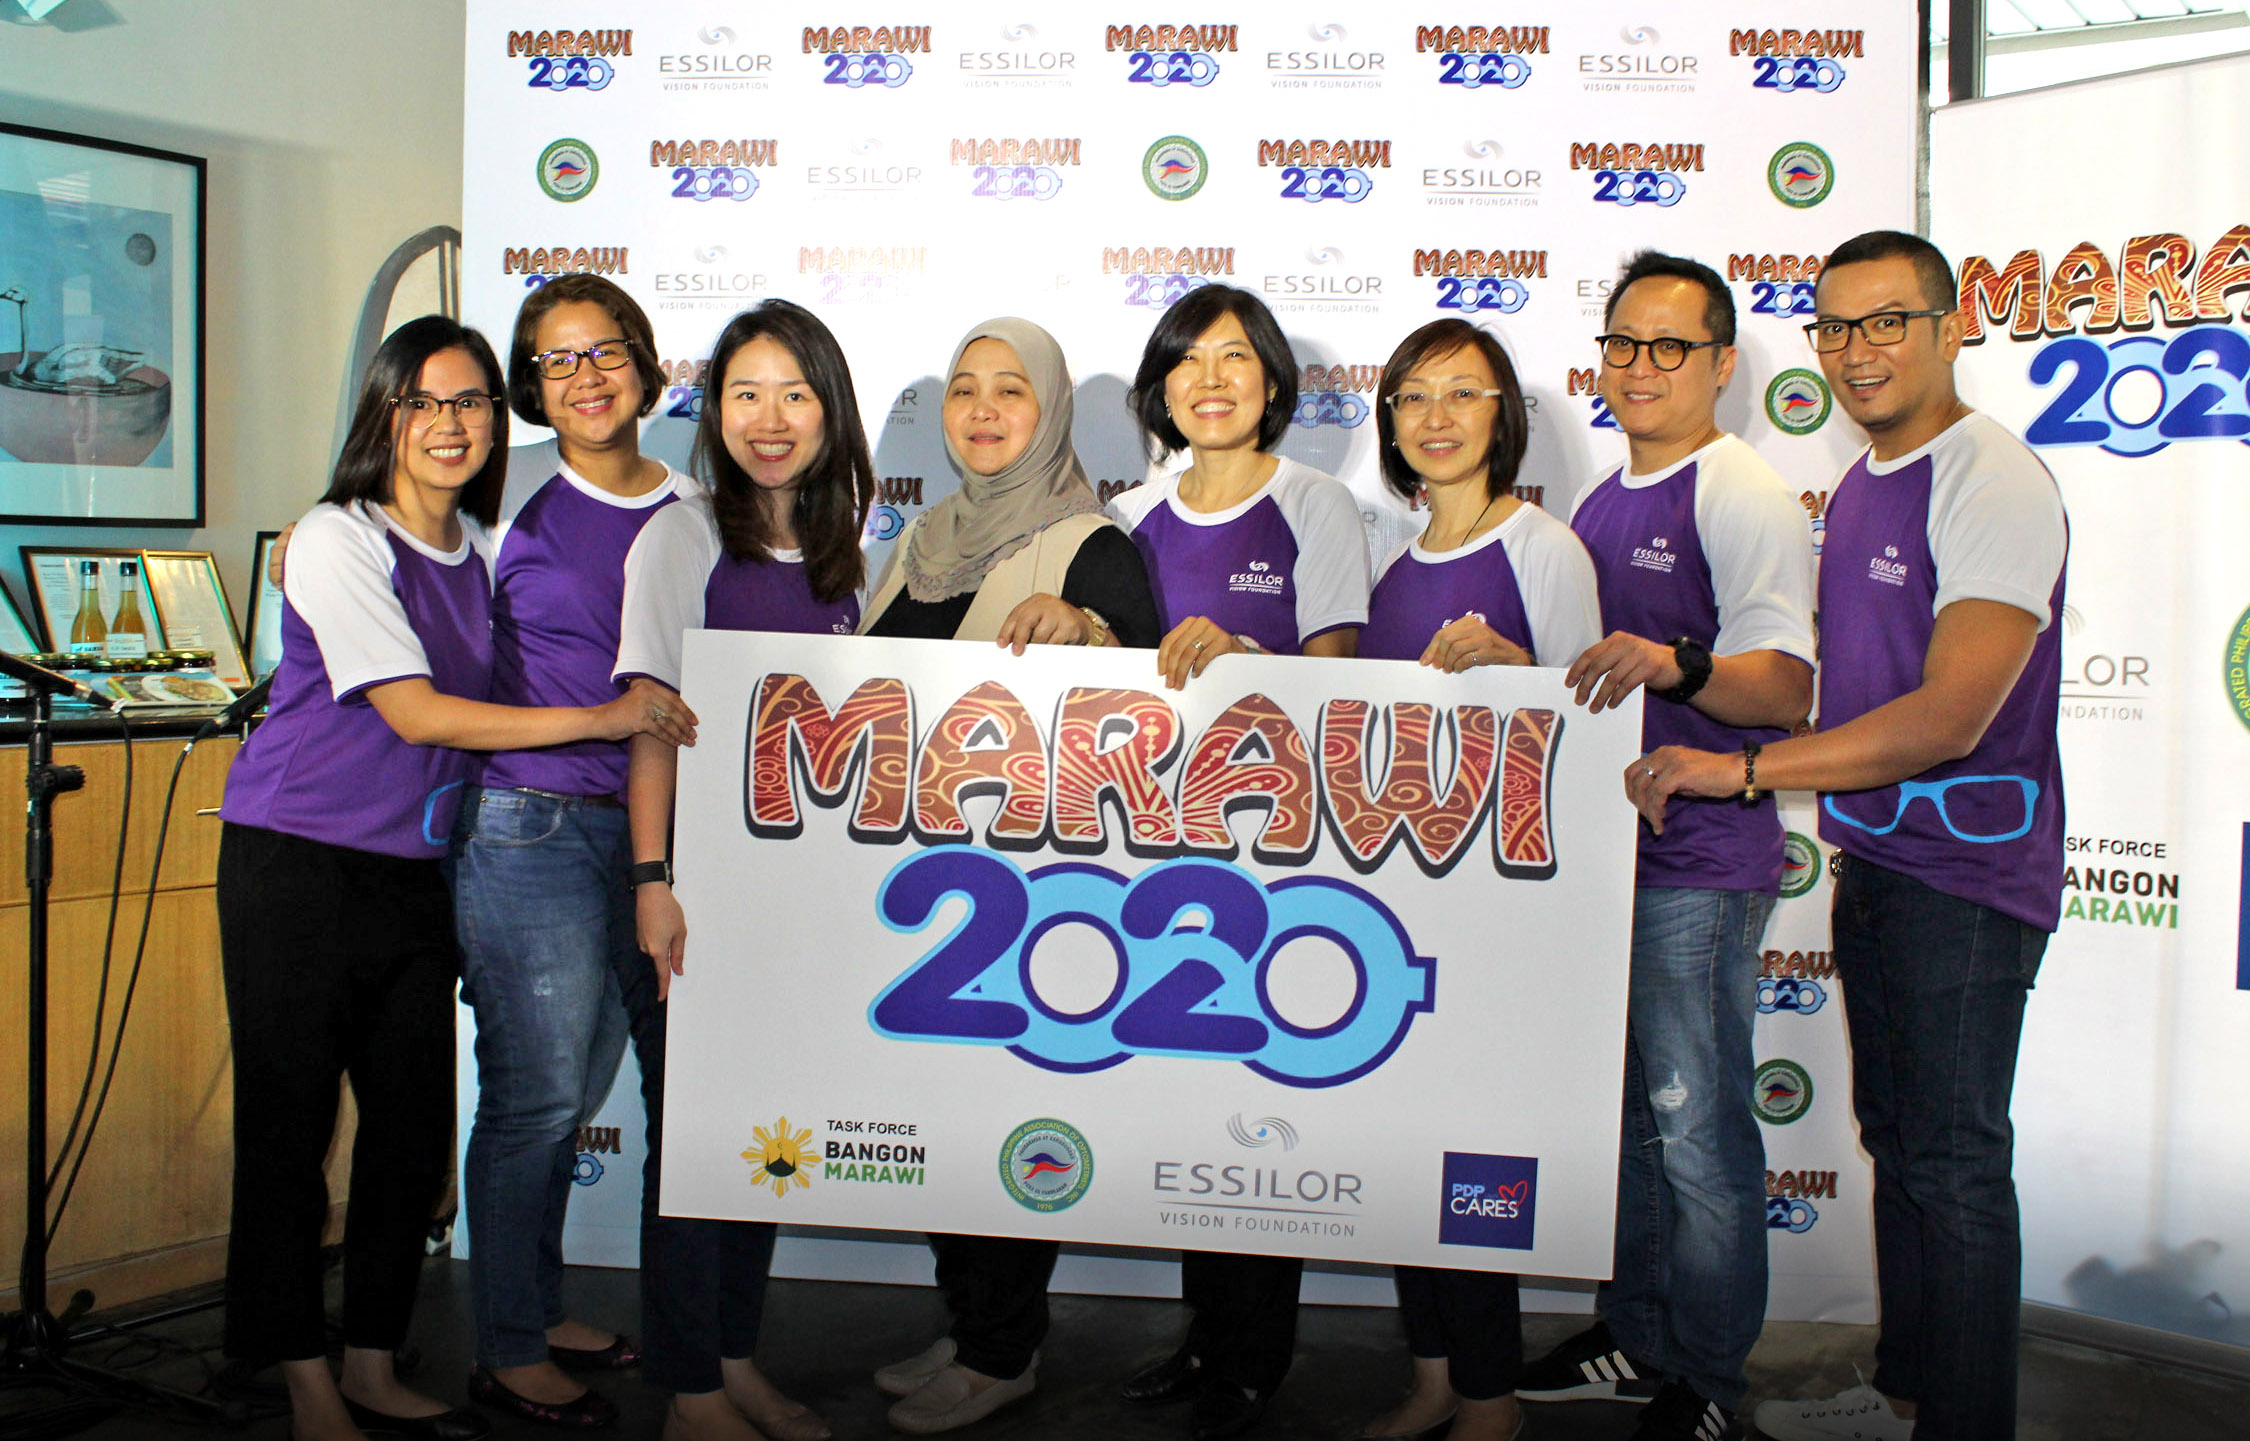 Essilor Vision Foundation launched Marawi 2020